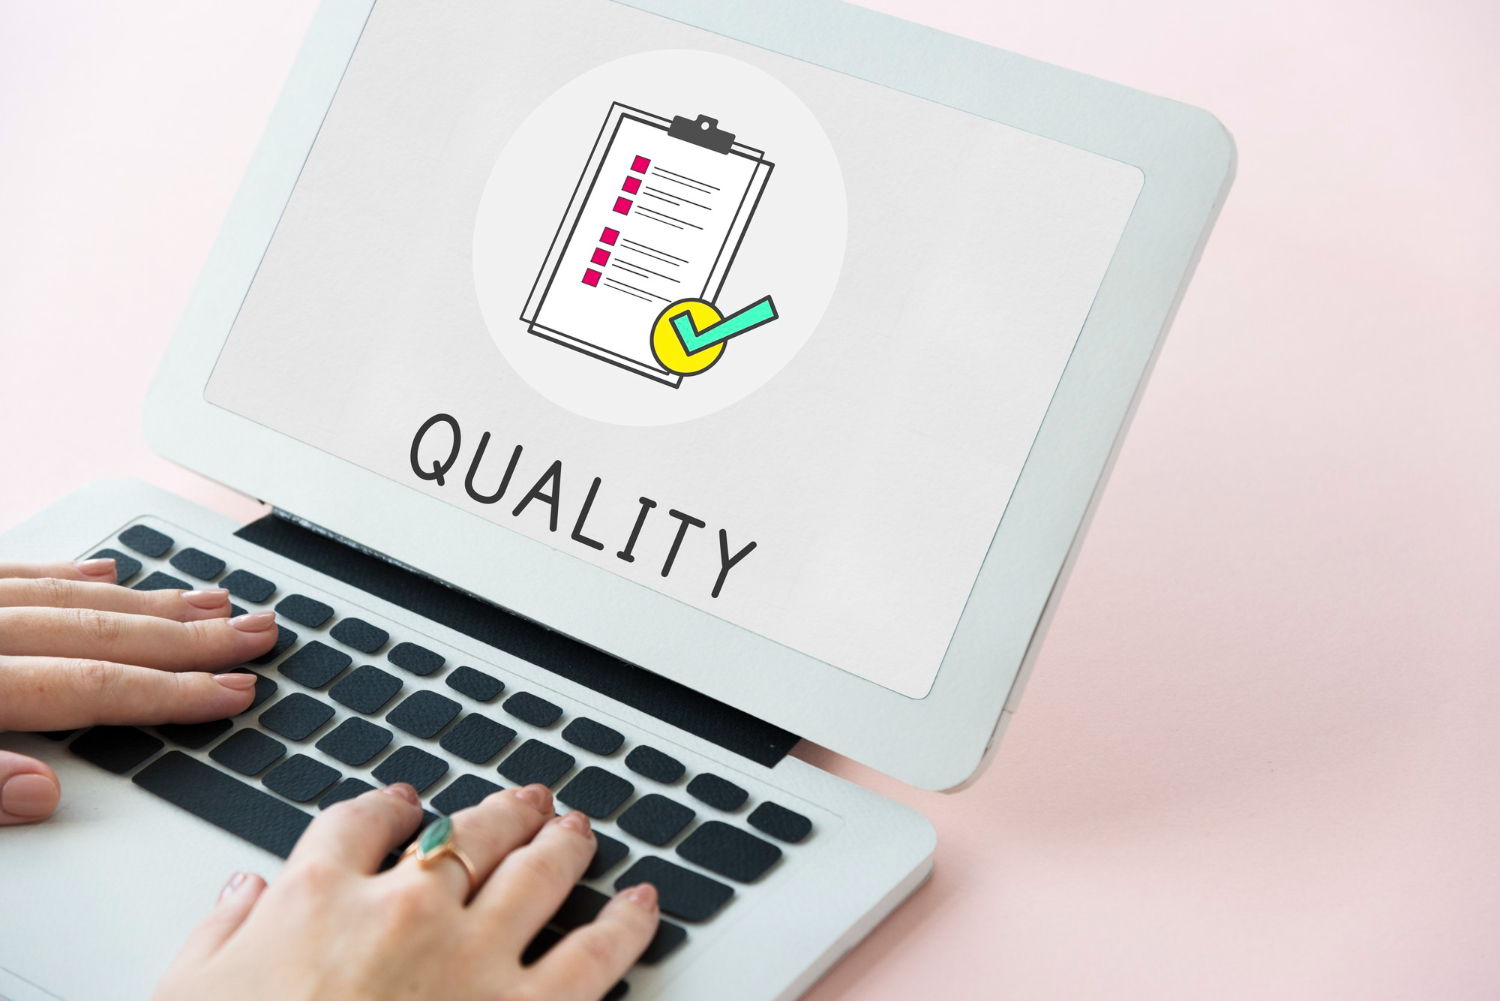 Ensure your content is high in quality and relevant